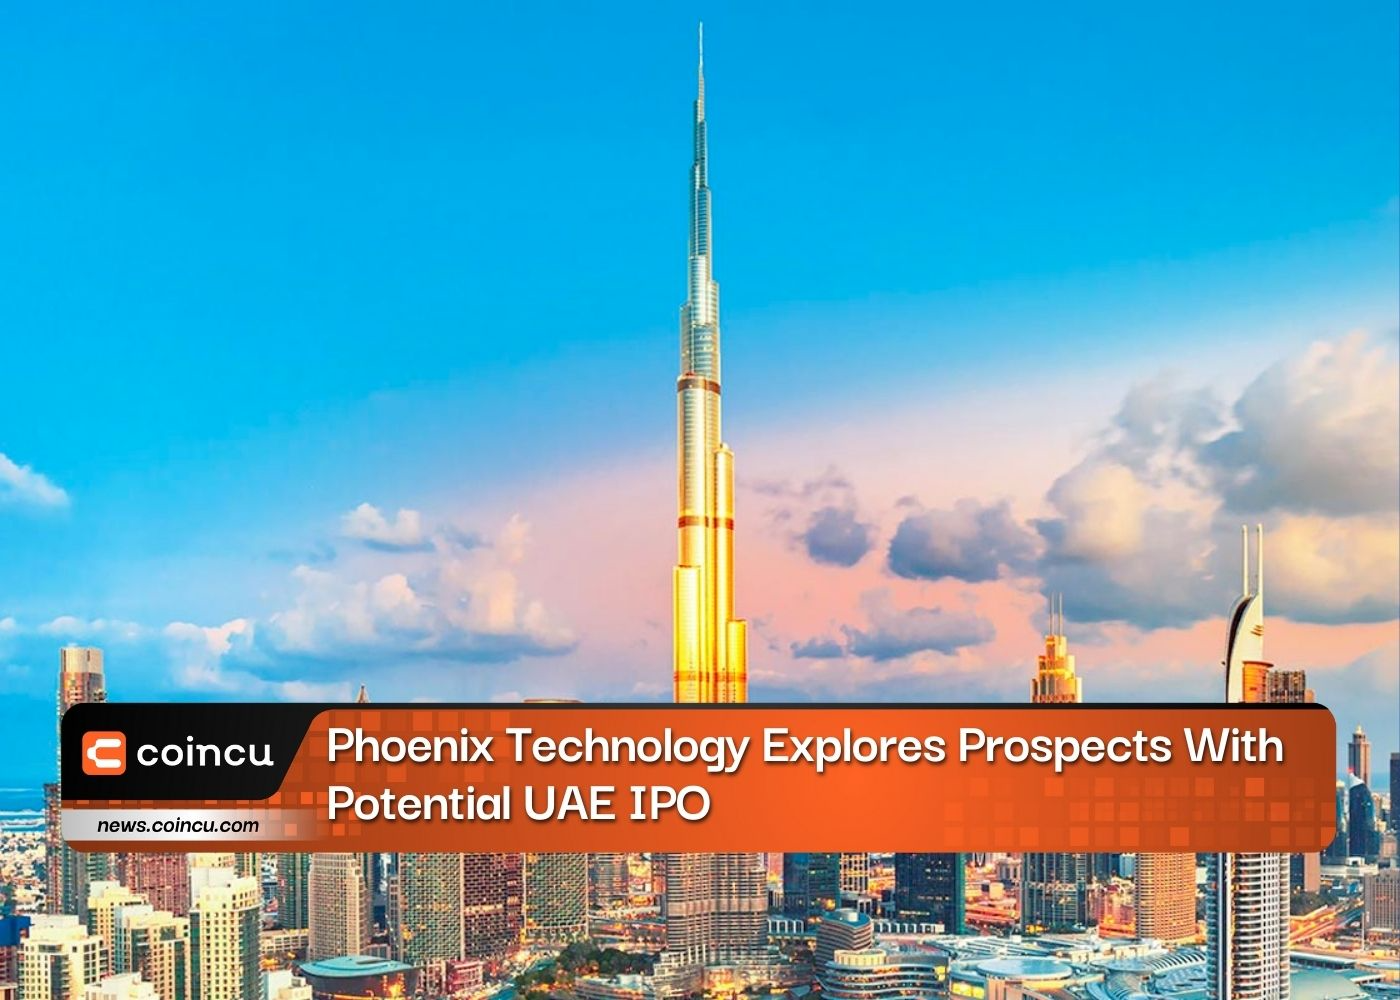 Phoenix Technology Explores Prospects With Potential UAE IPO